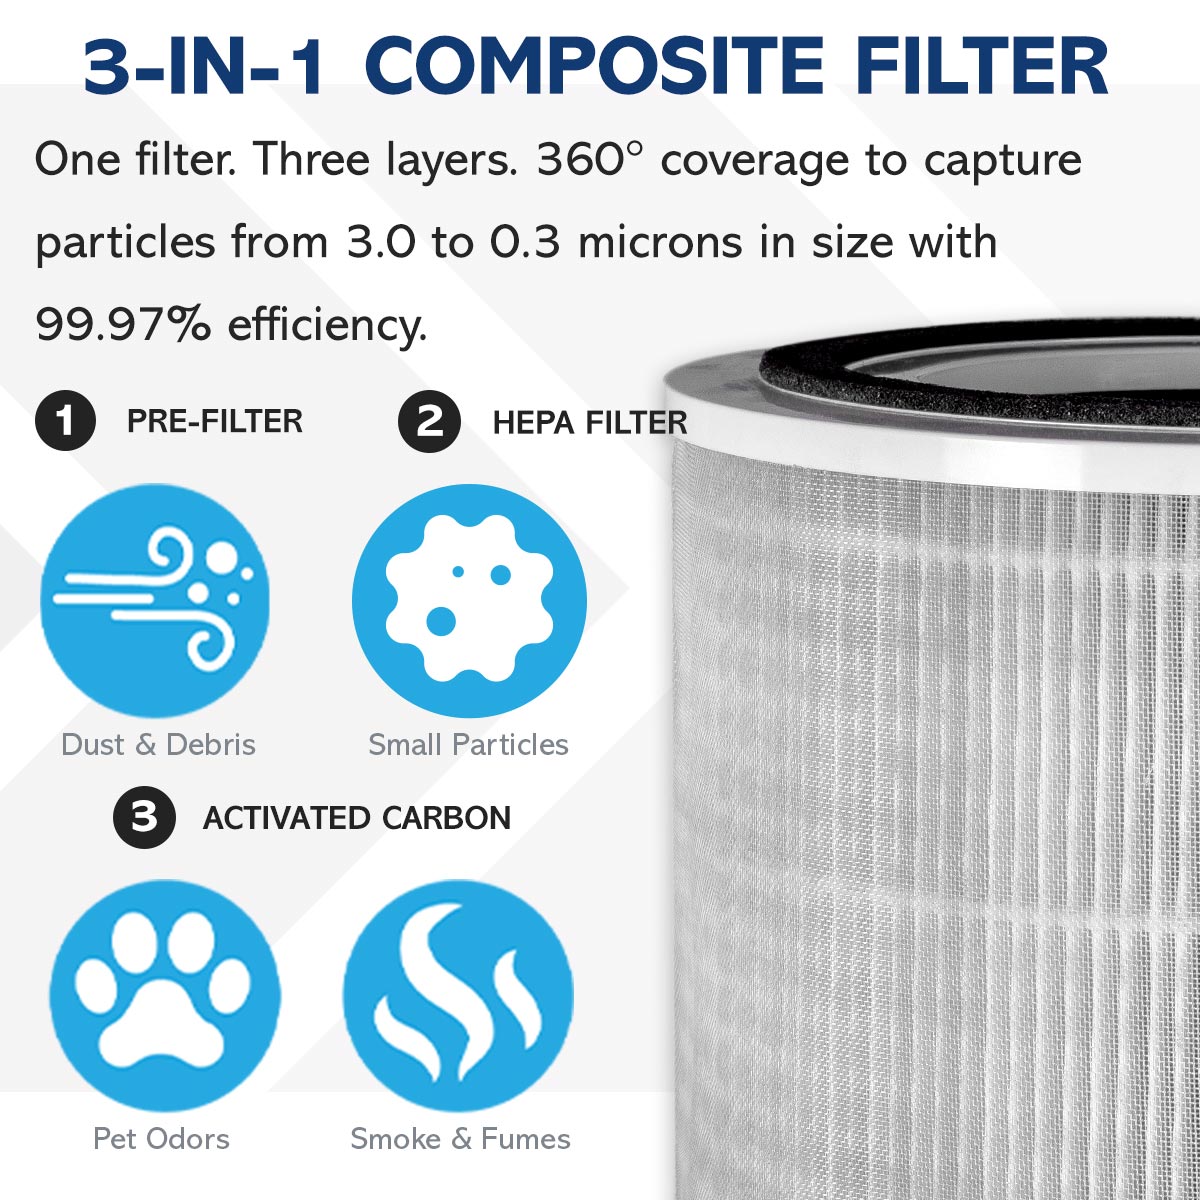 QFAP-210 3-Stage Filtration HEPA Air Filter